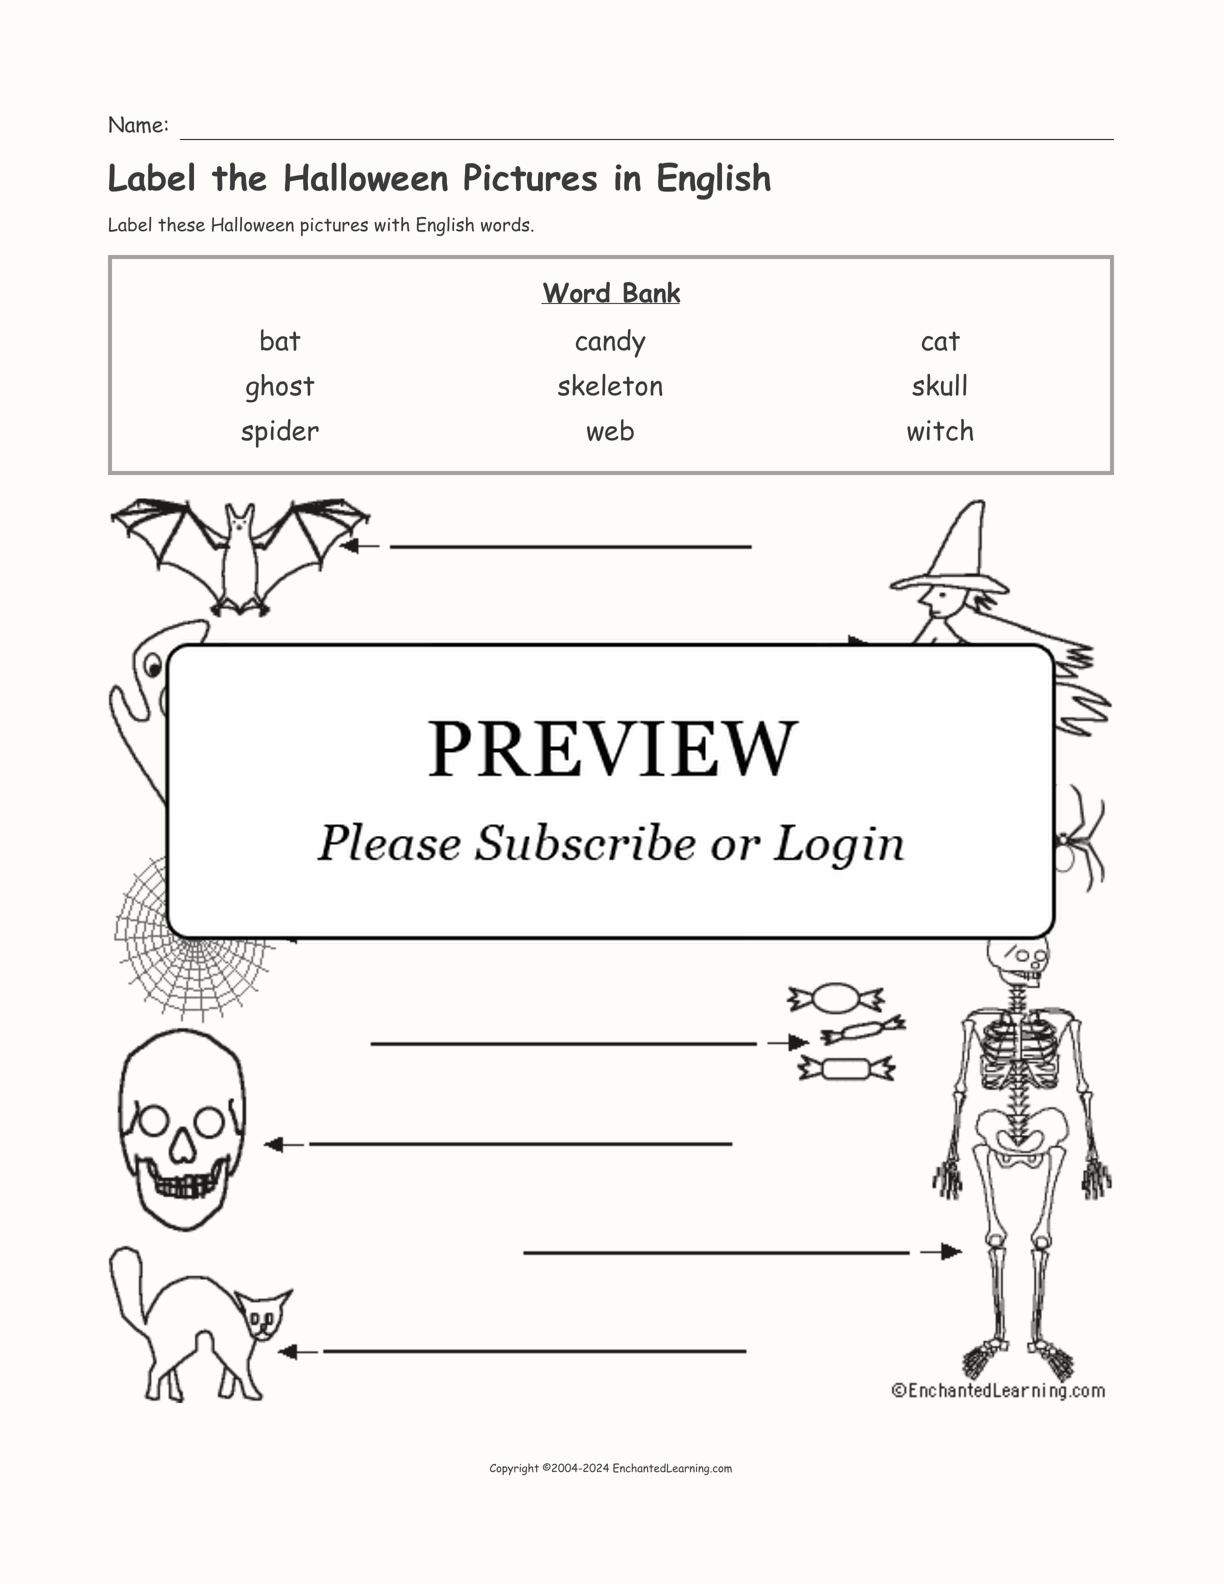 Label the Halloween Pictures in English interactive worksheet page 1